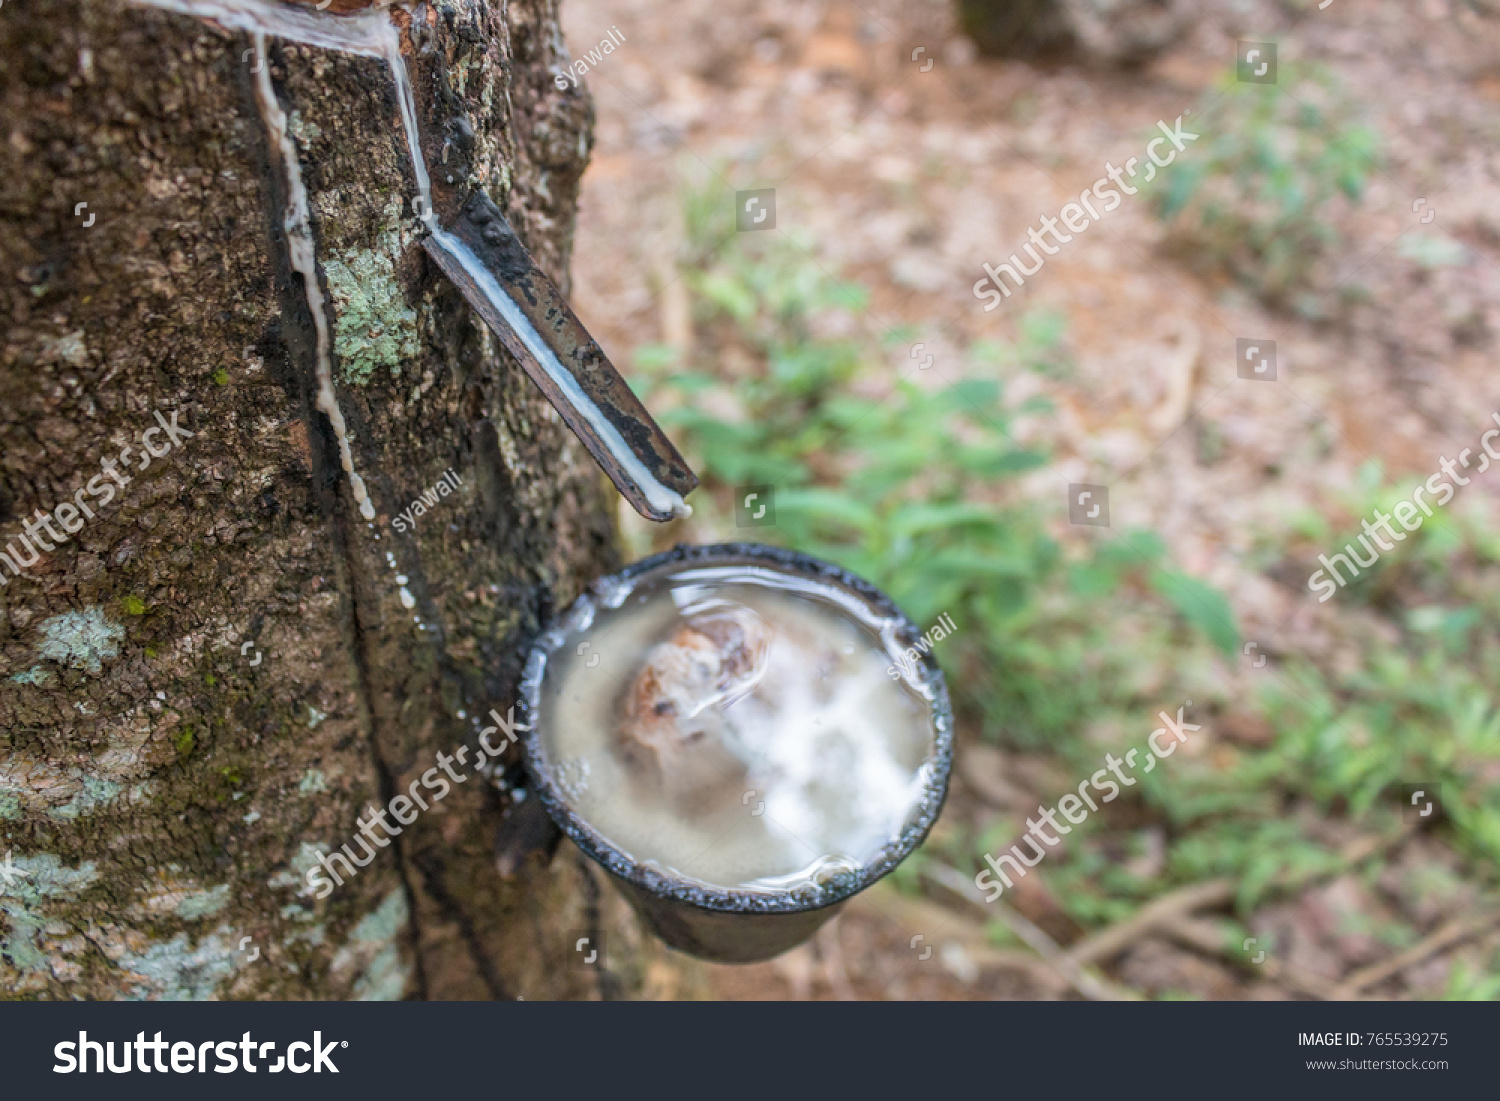 Raw rubber in a black bowl full of water. Rubber milk flows through the passage and goes into the bowl trap. There is scar that has been cut on the rubber stem. soft focus background. #765539275